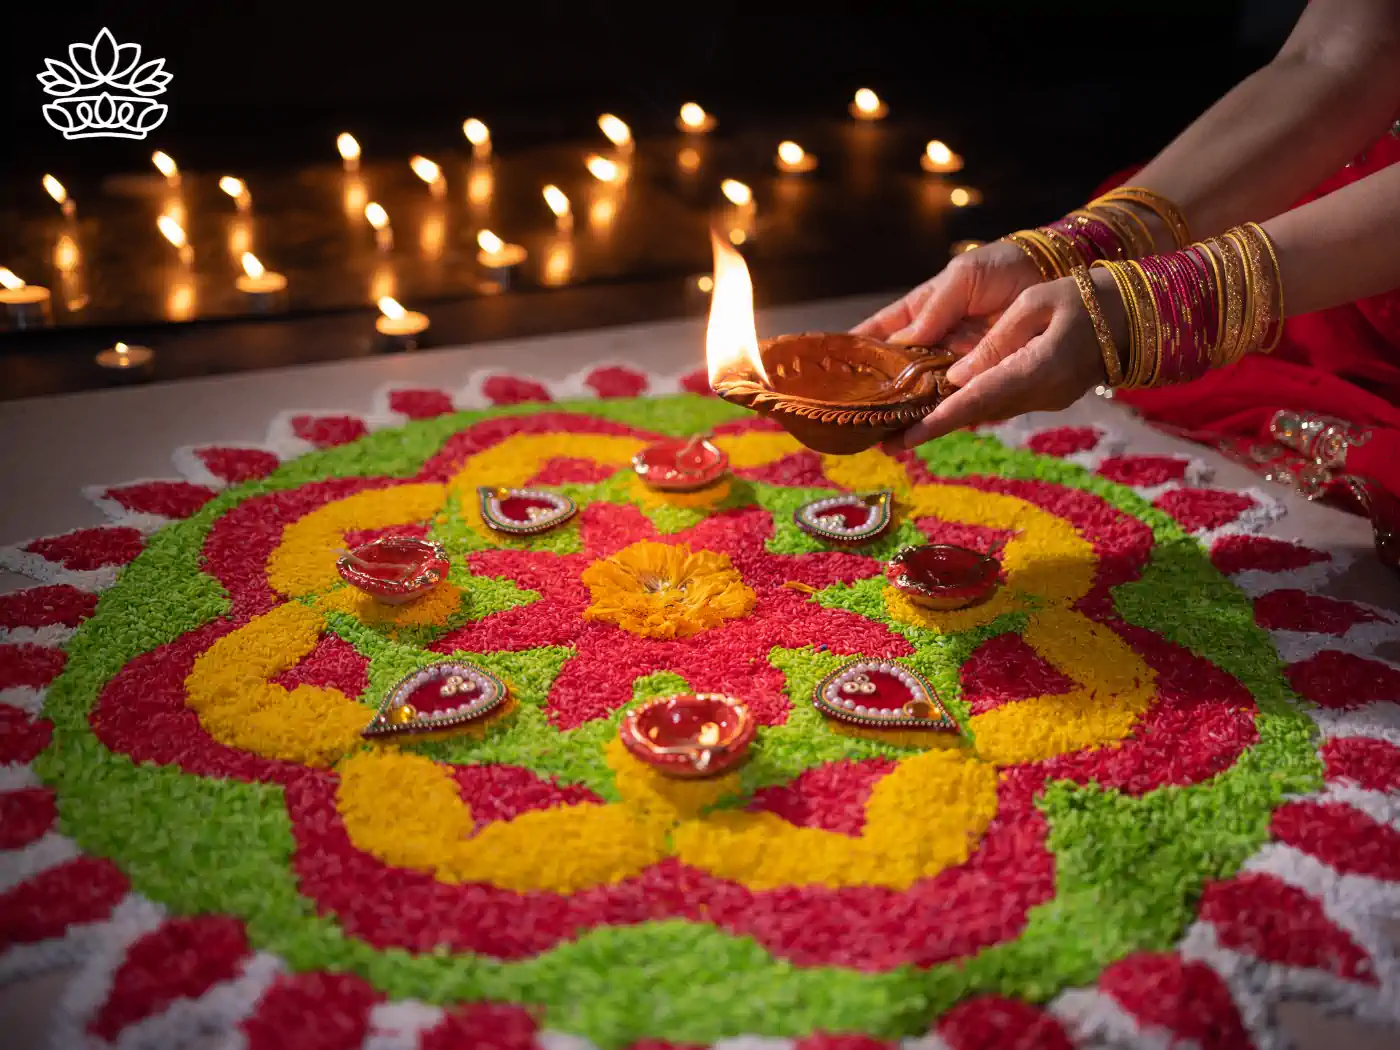 A woman in a red saree carefully placing a lit oil lamp on a beautifully designed rangoli made of vibrant green, red, yellow, and white flower petals, enhancing the festive atmosphere of Diwali. Fabulous Flowers and Gifts - Diwali Flowers. Delivered with Heart.